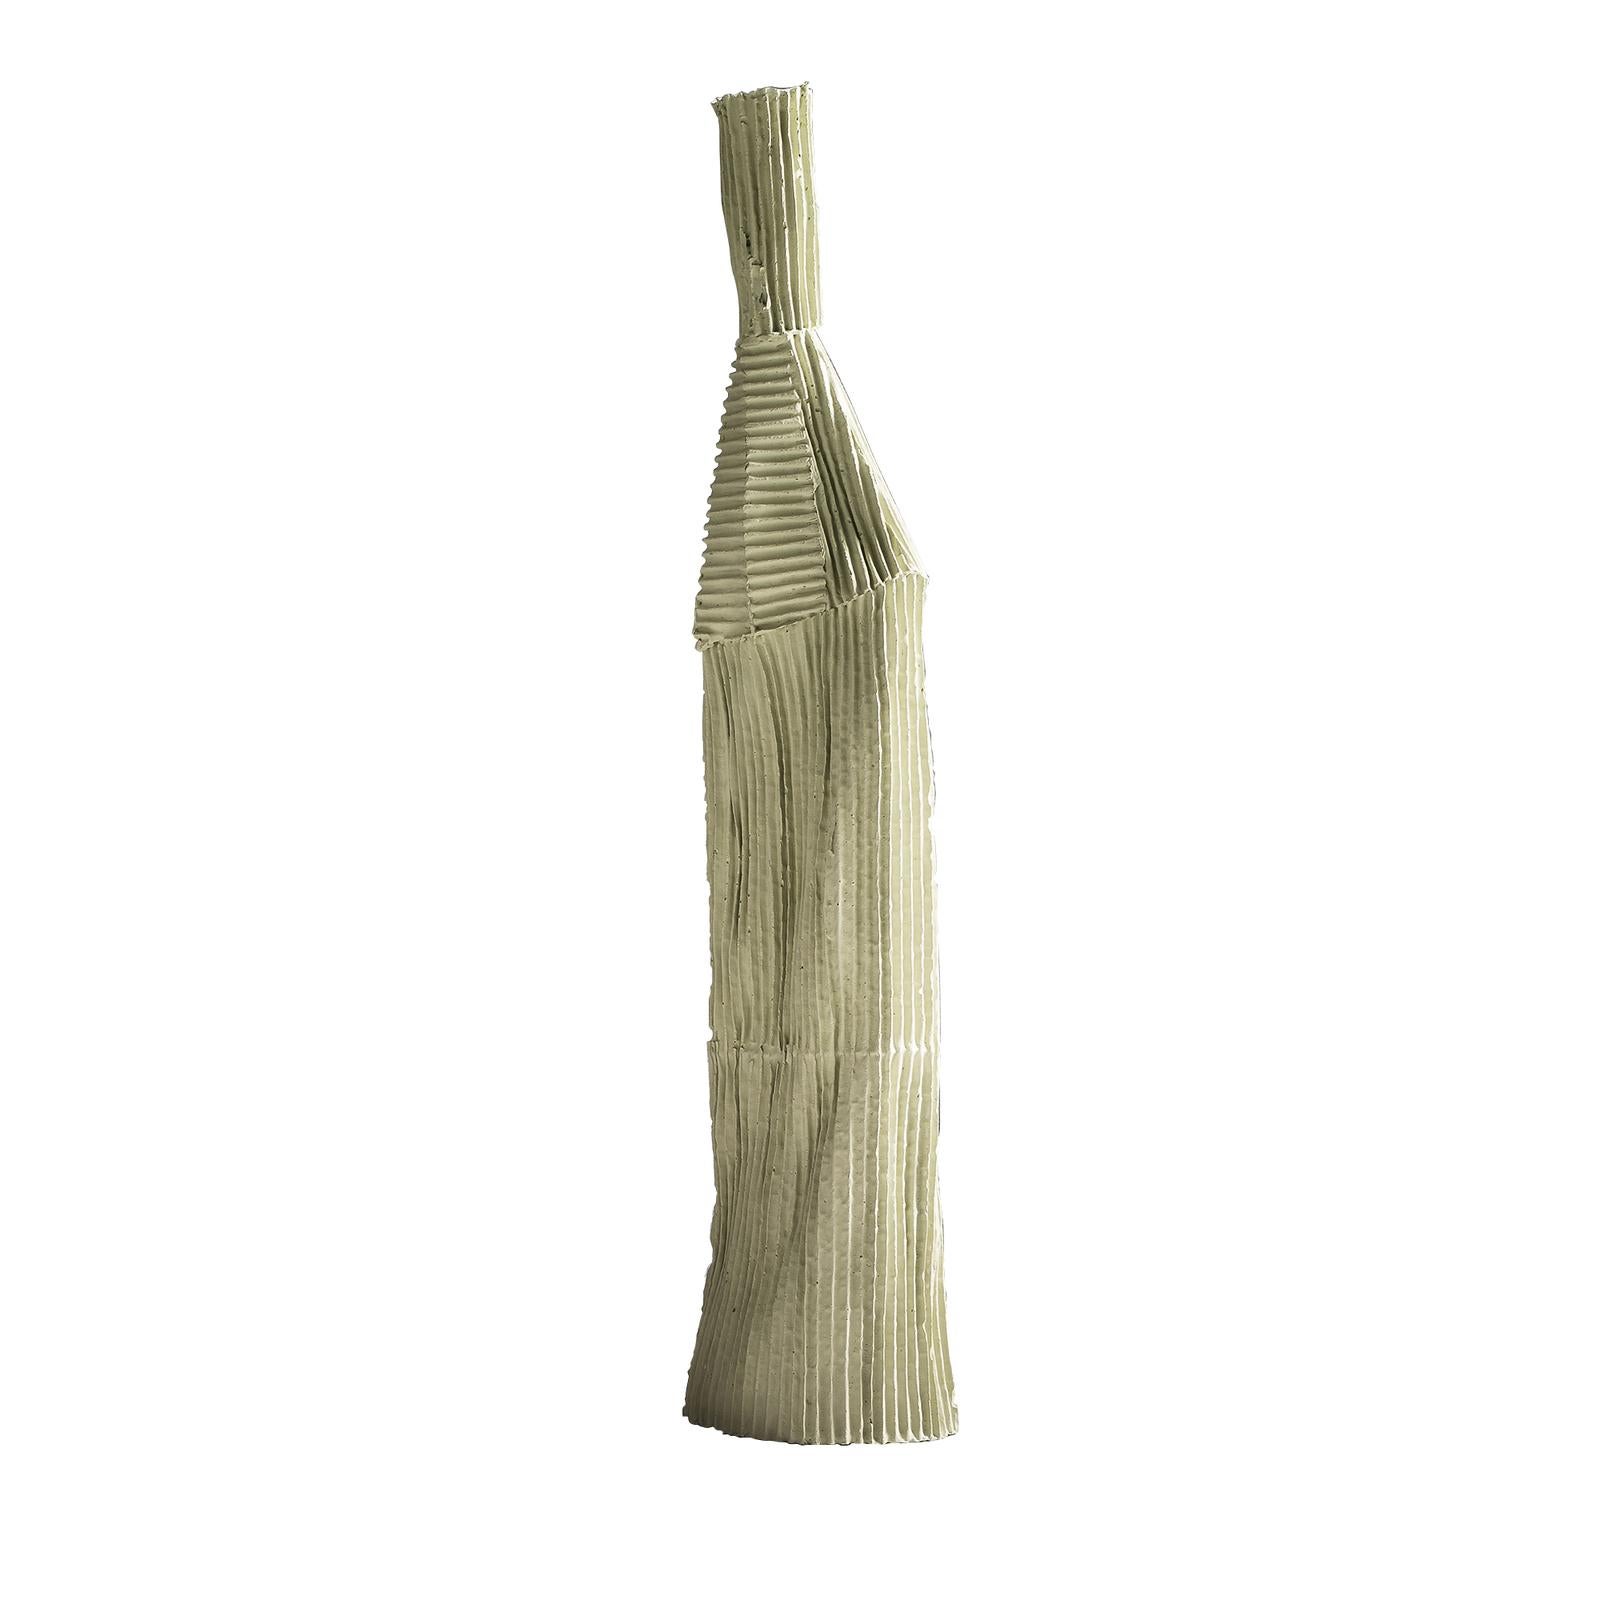 Part of the Cartocci collection, ceramist Paola Paronetto revisits everyday objects with modern flair in this handcrafted, paper clay sculpture. This innovative material is composed of natural fibers added to the clay base, creating a distinctive,